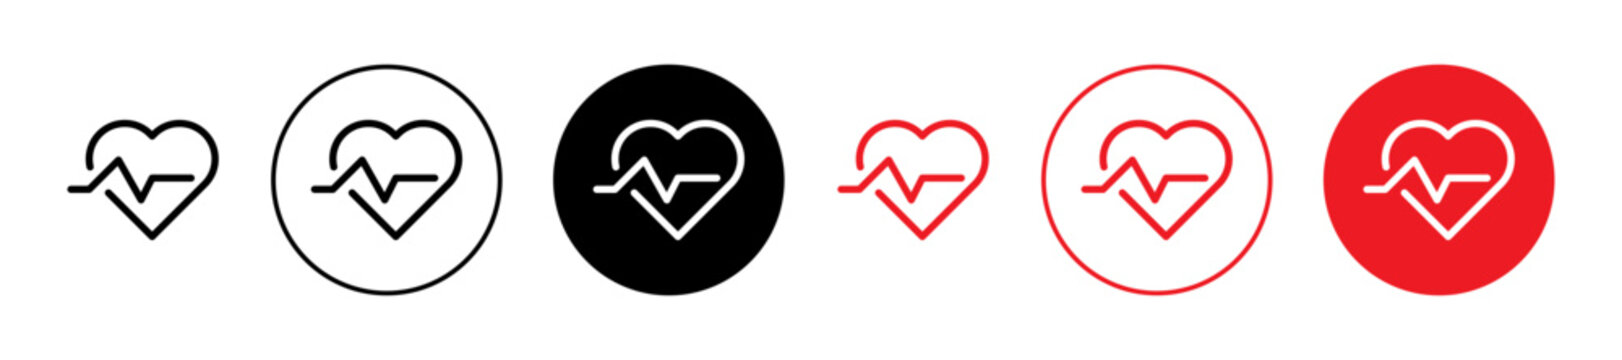 Heart Rate Pulse Vector Illustration Set. Cardio Monitoring sign suitable for apps and websites UI design style.